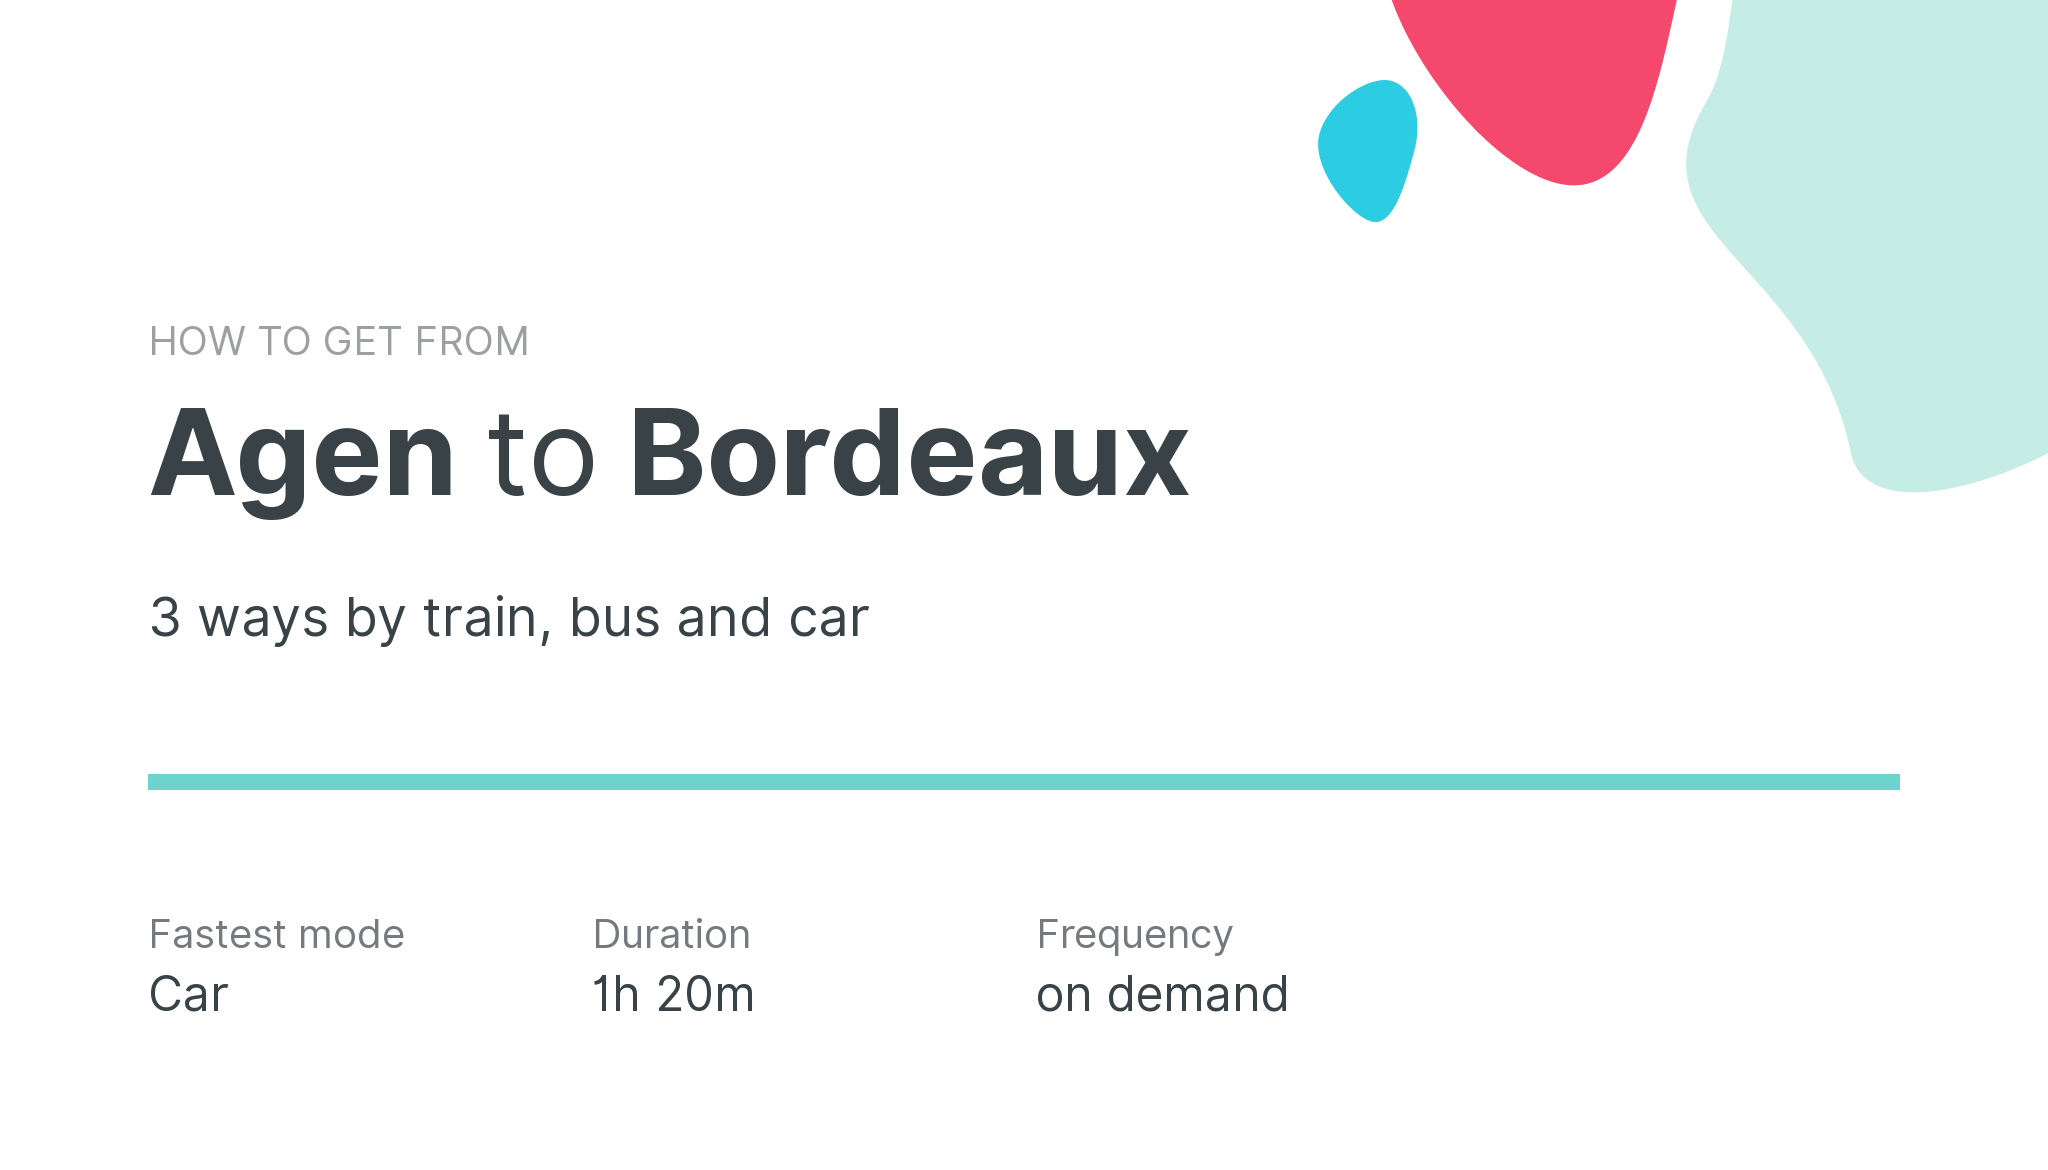 How do I get from Agen to Bordeaux